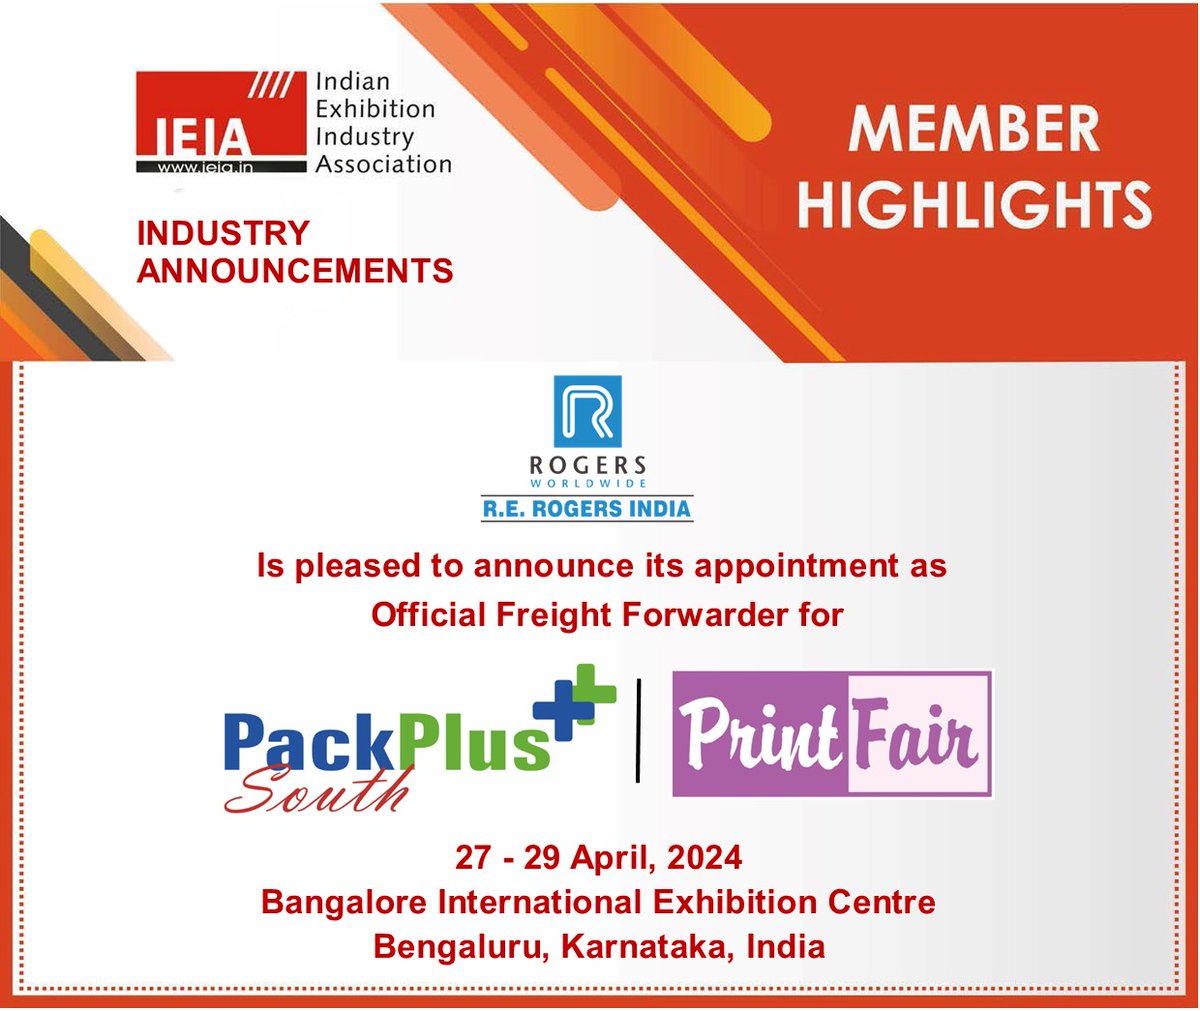 𝗜𝗡𝗗𝗨𝗦𝗧𝗥𝗬 𝗔𝗡𝗡𝗢𝗨𝗡𝗖𝗘𝗠𝗘𝗡𝗧- IEIA Member- R E Rogers India has been appointed as Official Freight Forwarder for PackPlus South & Print Fair 2024, to be held in @BIECentre , Bengaluru, India For more details, please visit: rogersworldwideindia.com #RERogers #IEIA